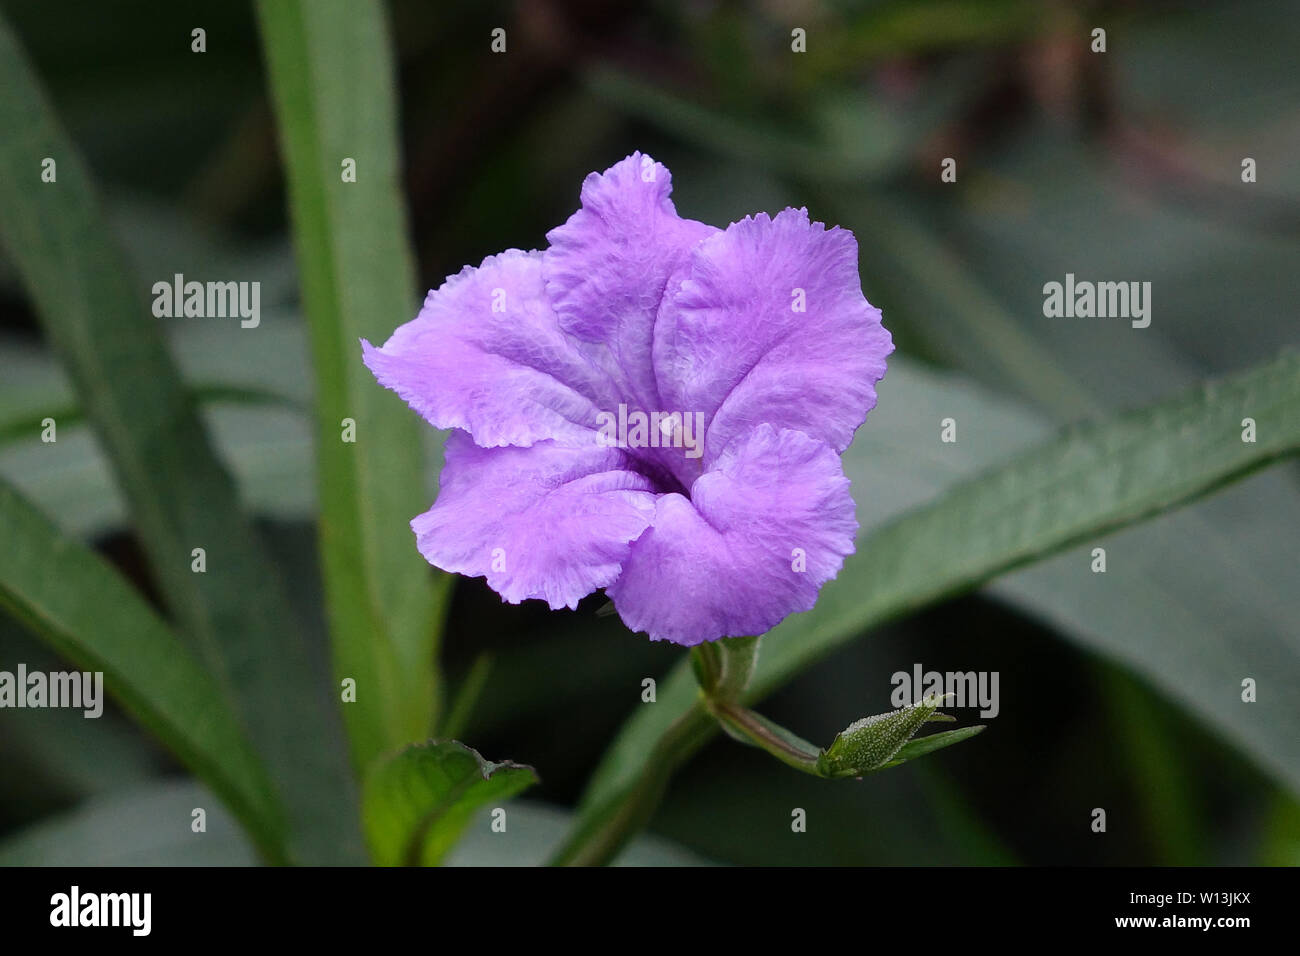 Beautiful violet flower on green nature background Stock Photo